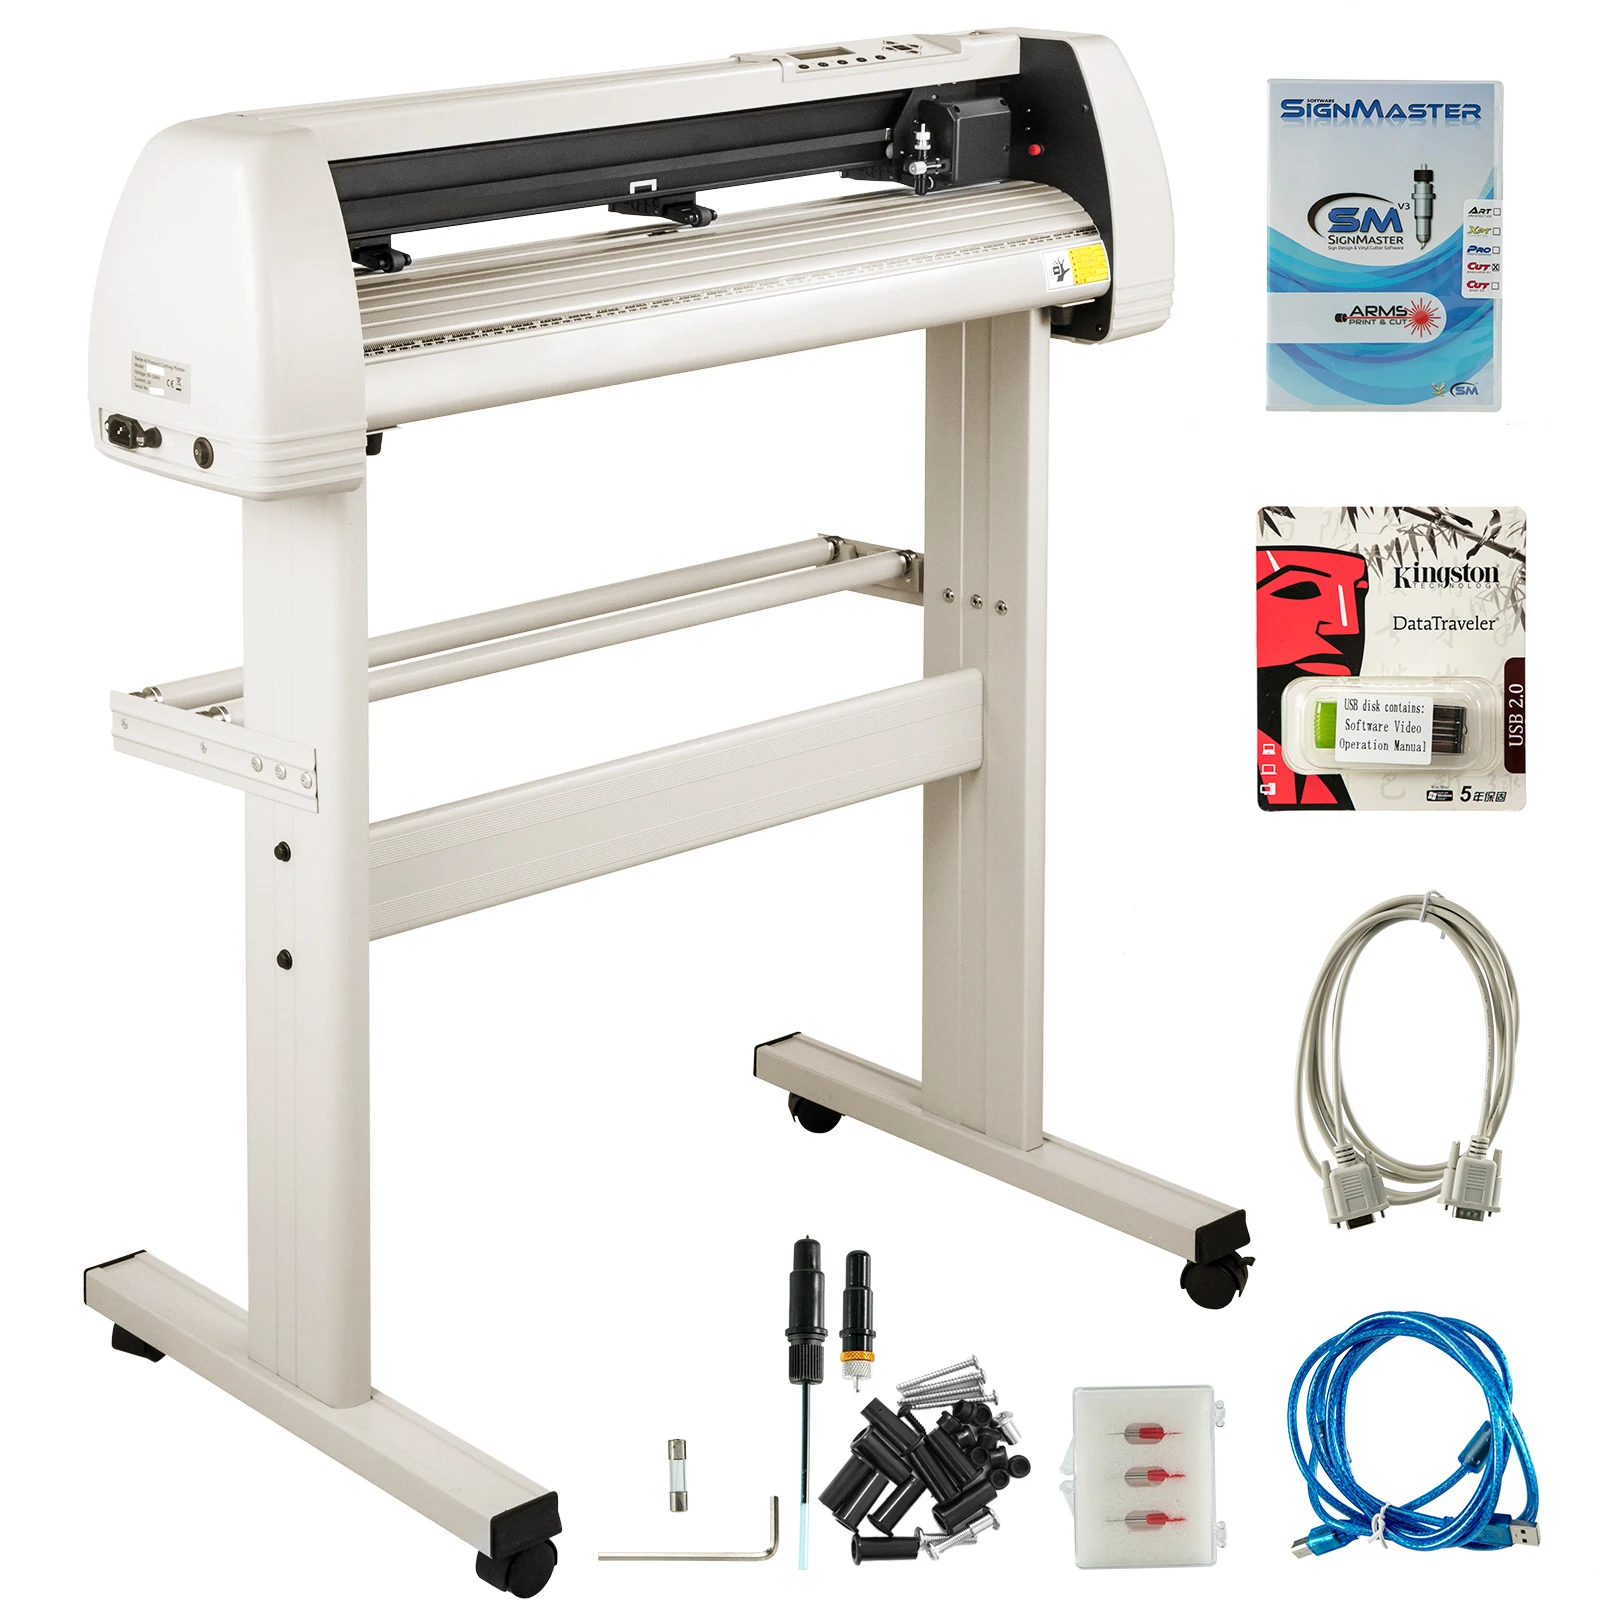 VEVOR 34" 870mm Vinyl Cutting Plotter Cutter Machine with Signmaster Software & 20 Blades Printing for T-Shirts Signs Stickers